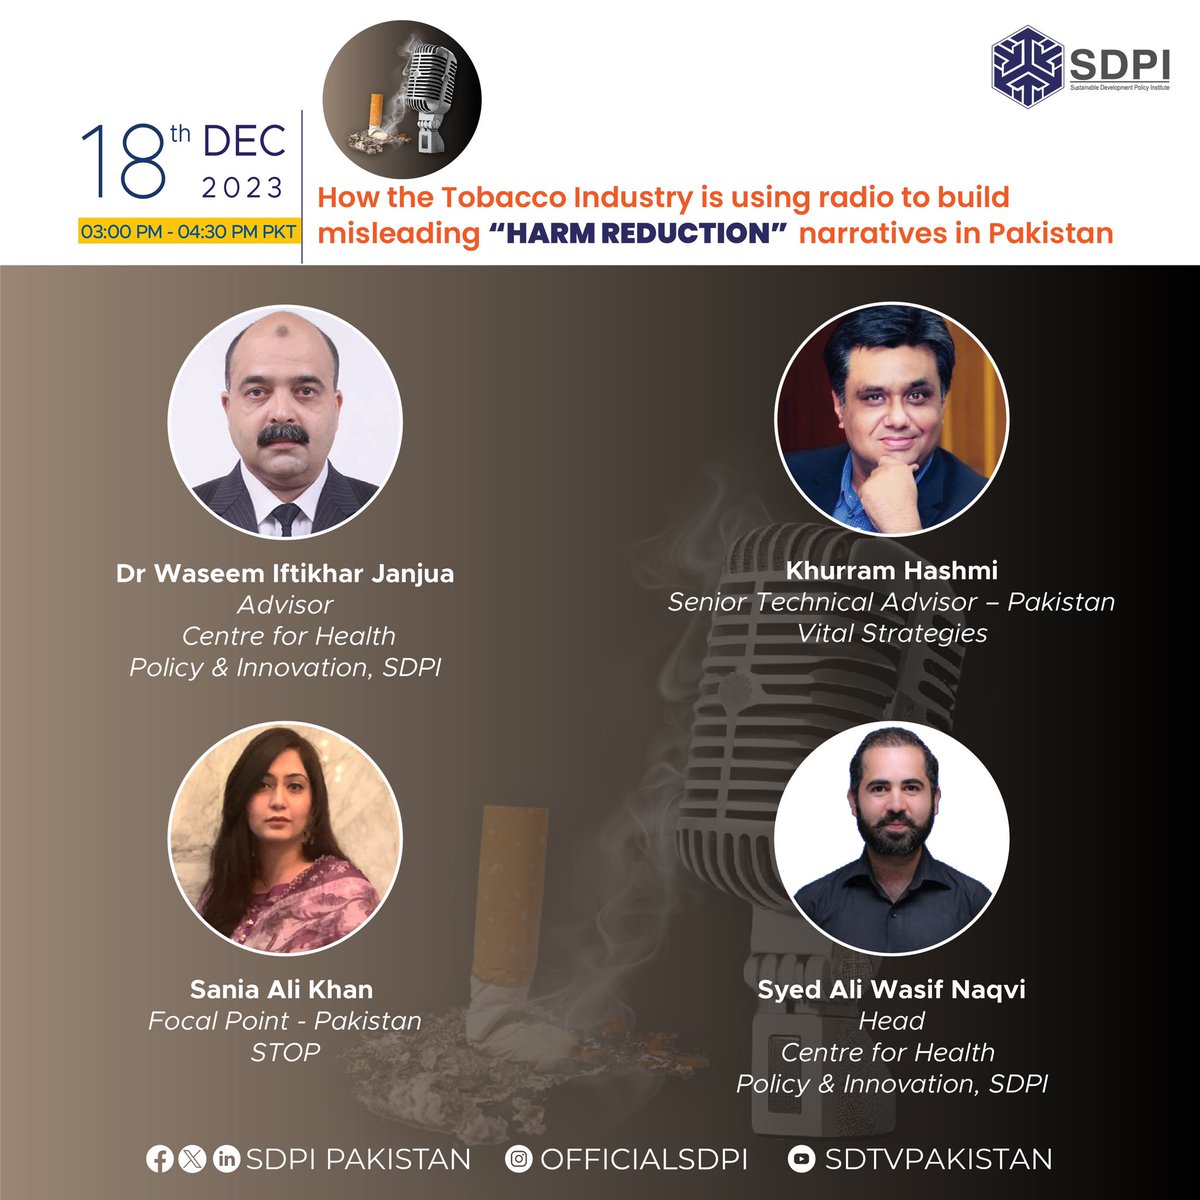 Join our seminar tomorrow as our worthy panelists will speaking on:🔻 “How the Tobacco Industry is using radio to build HARM REDUCTION narratives in Pakistan” bit.ly/3RqfZXR